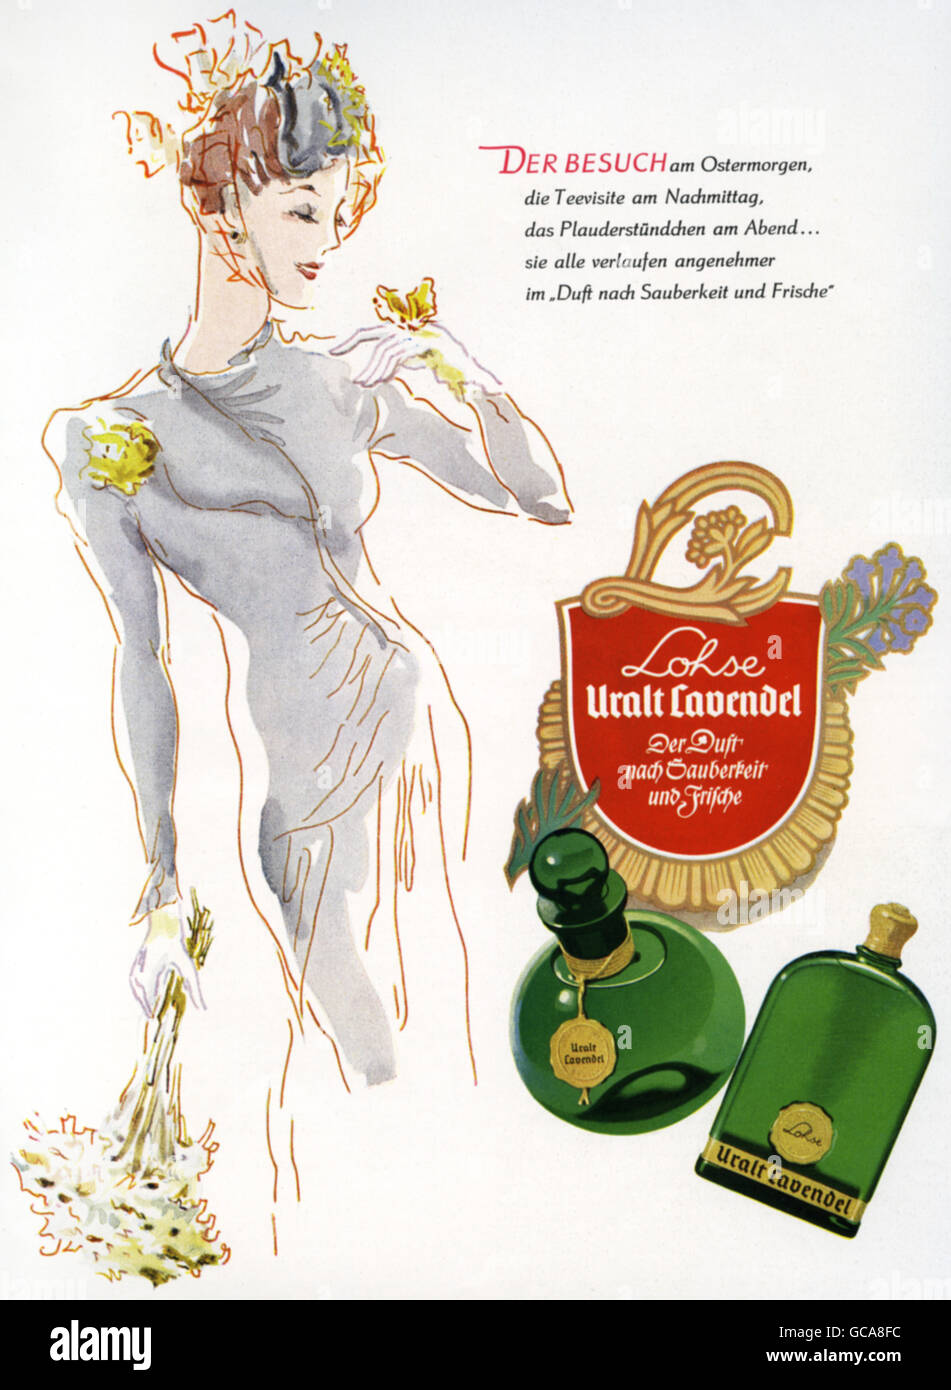 advertising, cosmetics, perfume, Lohse Uralt Lavendel, advert, Germany, 1941, Additional-Rights-Clearences-Not Available Stock Photo